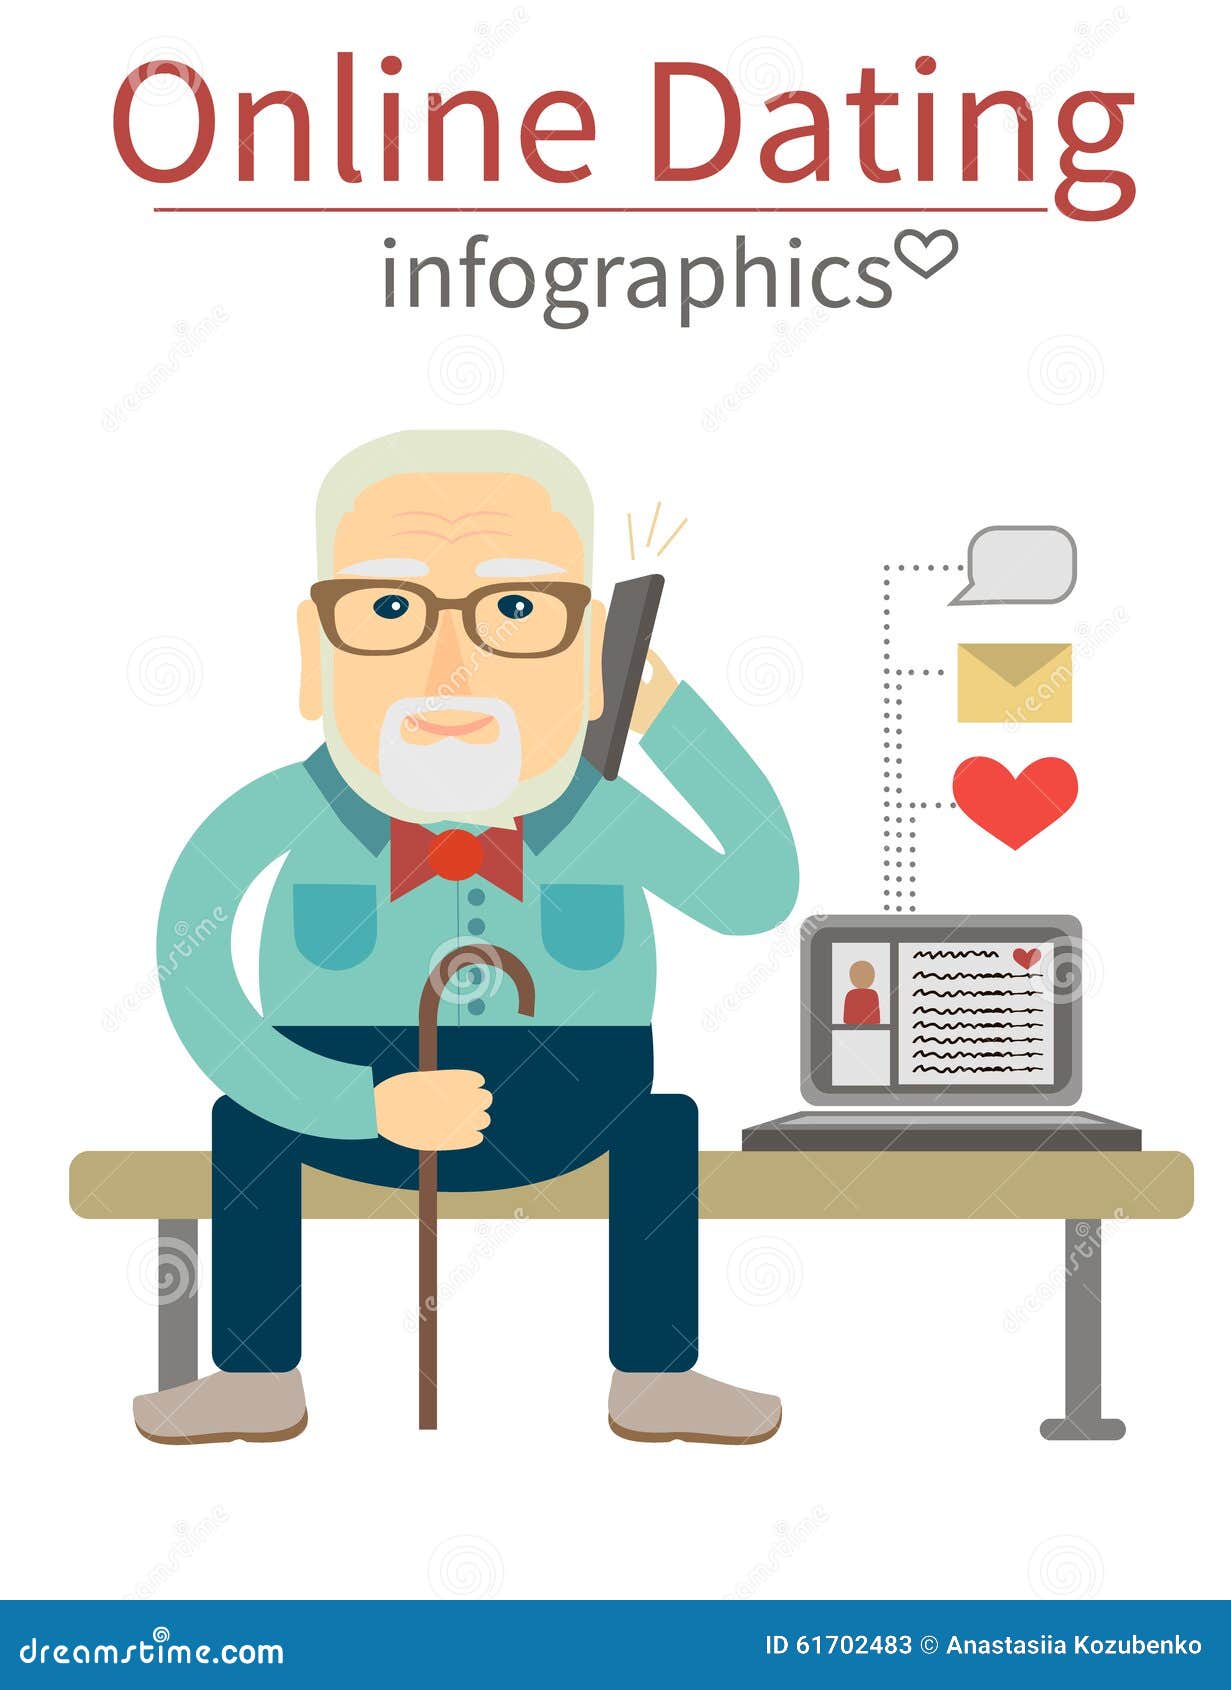 online dating clipart - photo #22